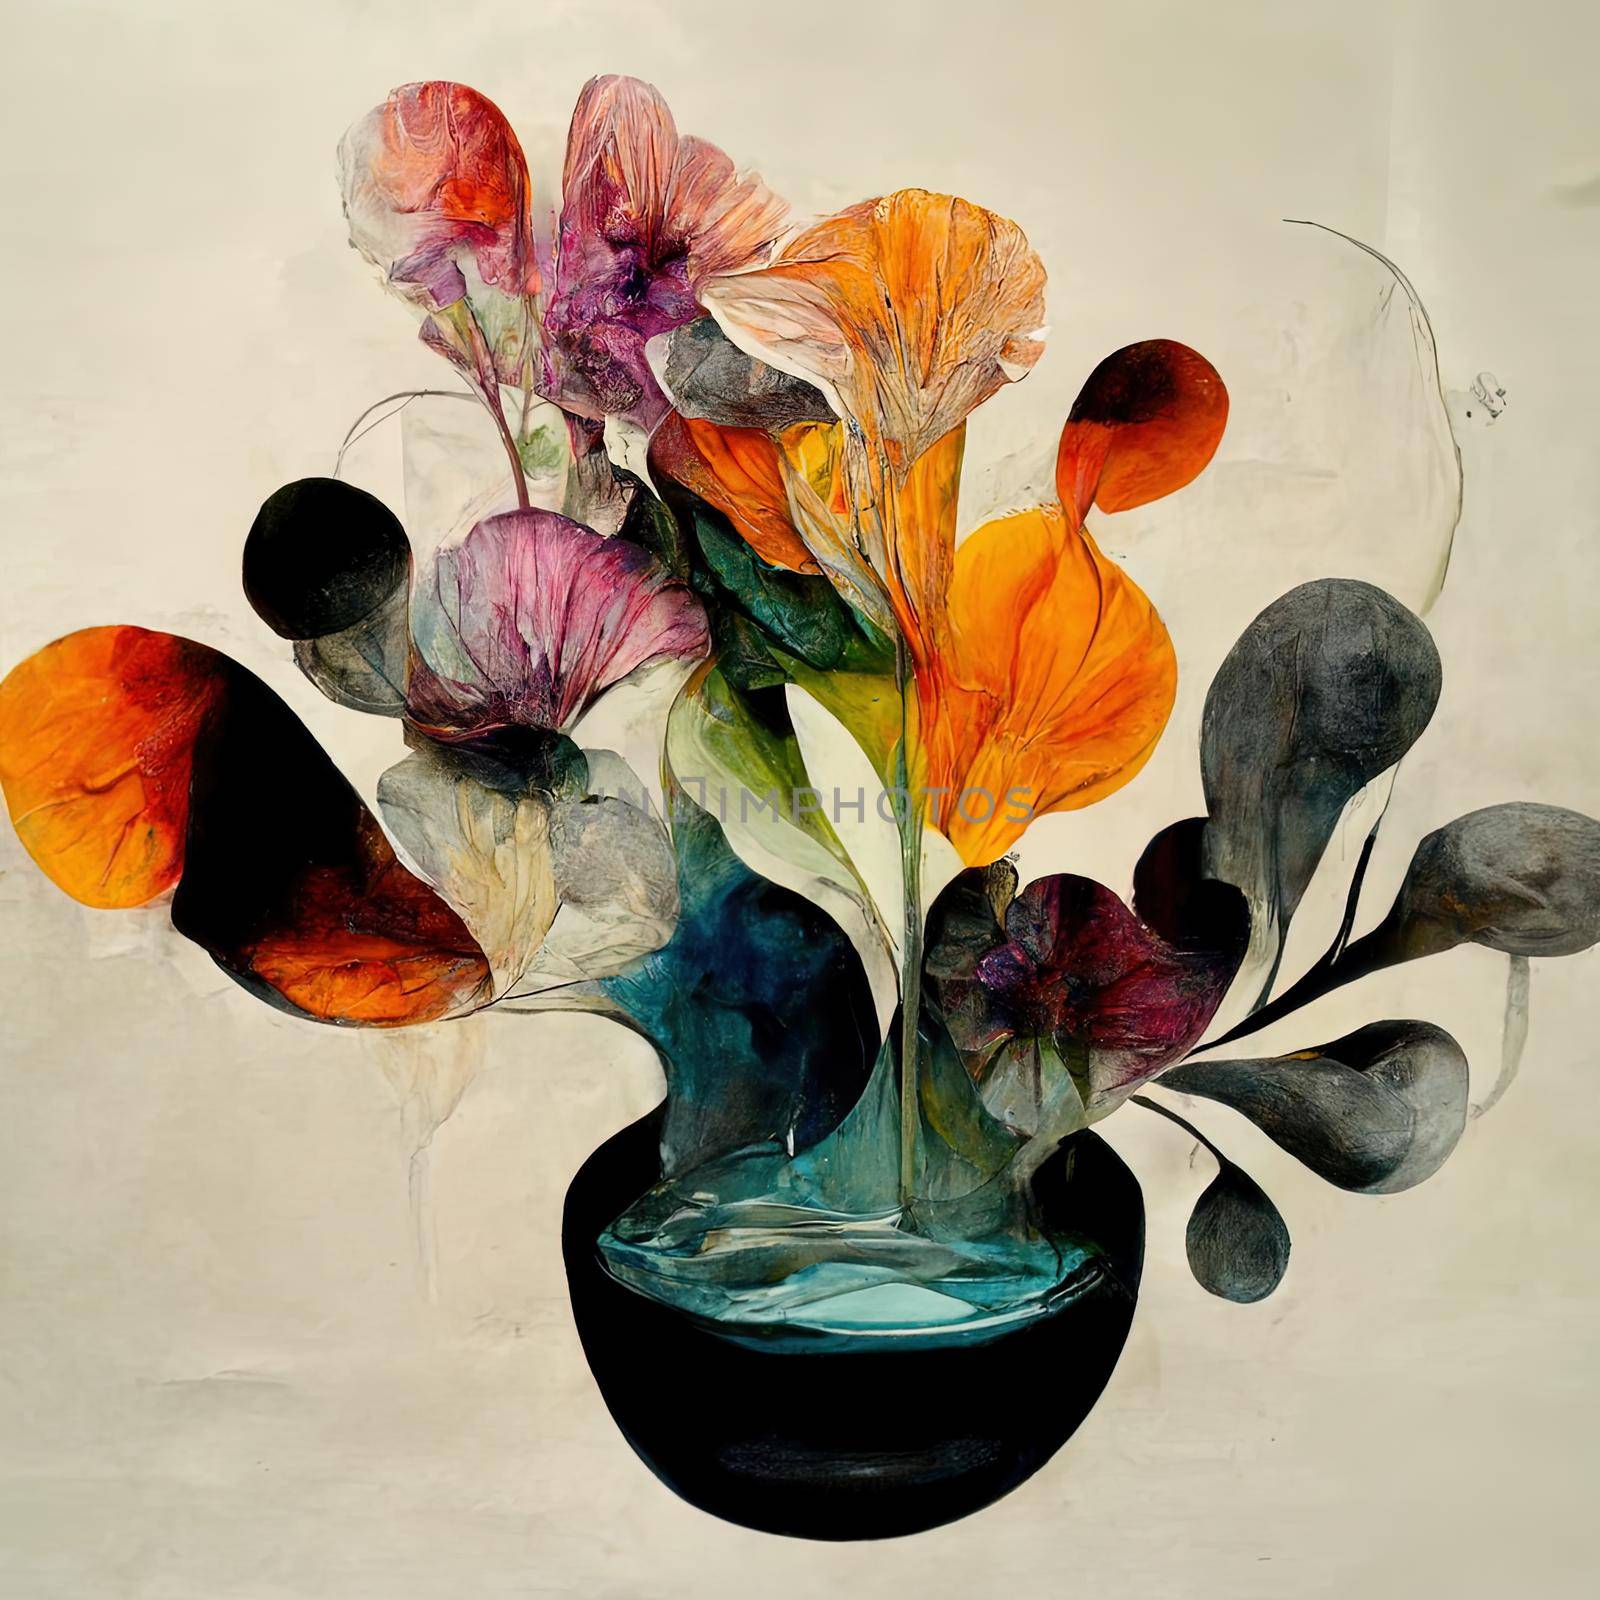 Arrangement of flowers, liquid splashes and organic shapes by 2ragon